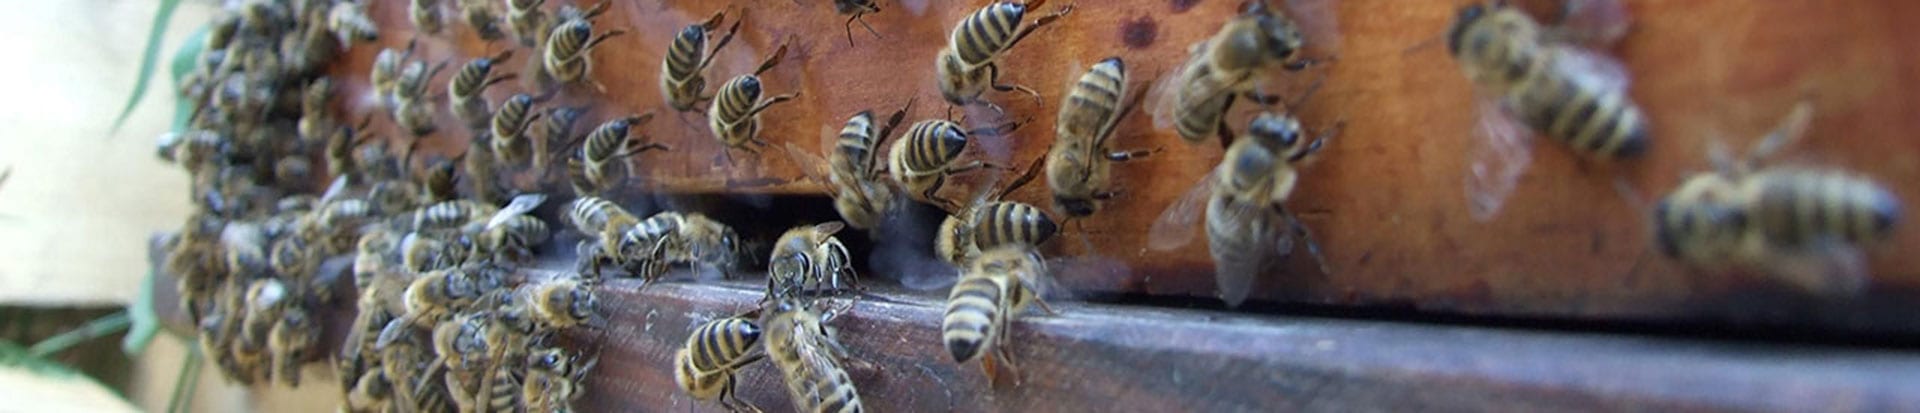 Many bees on a bee box.